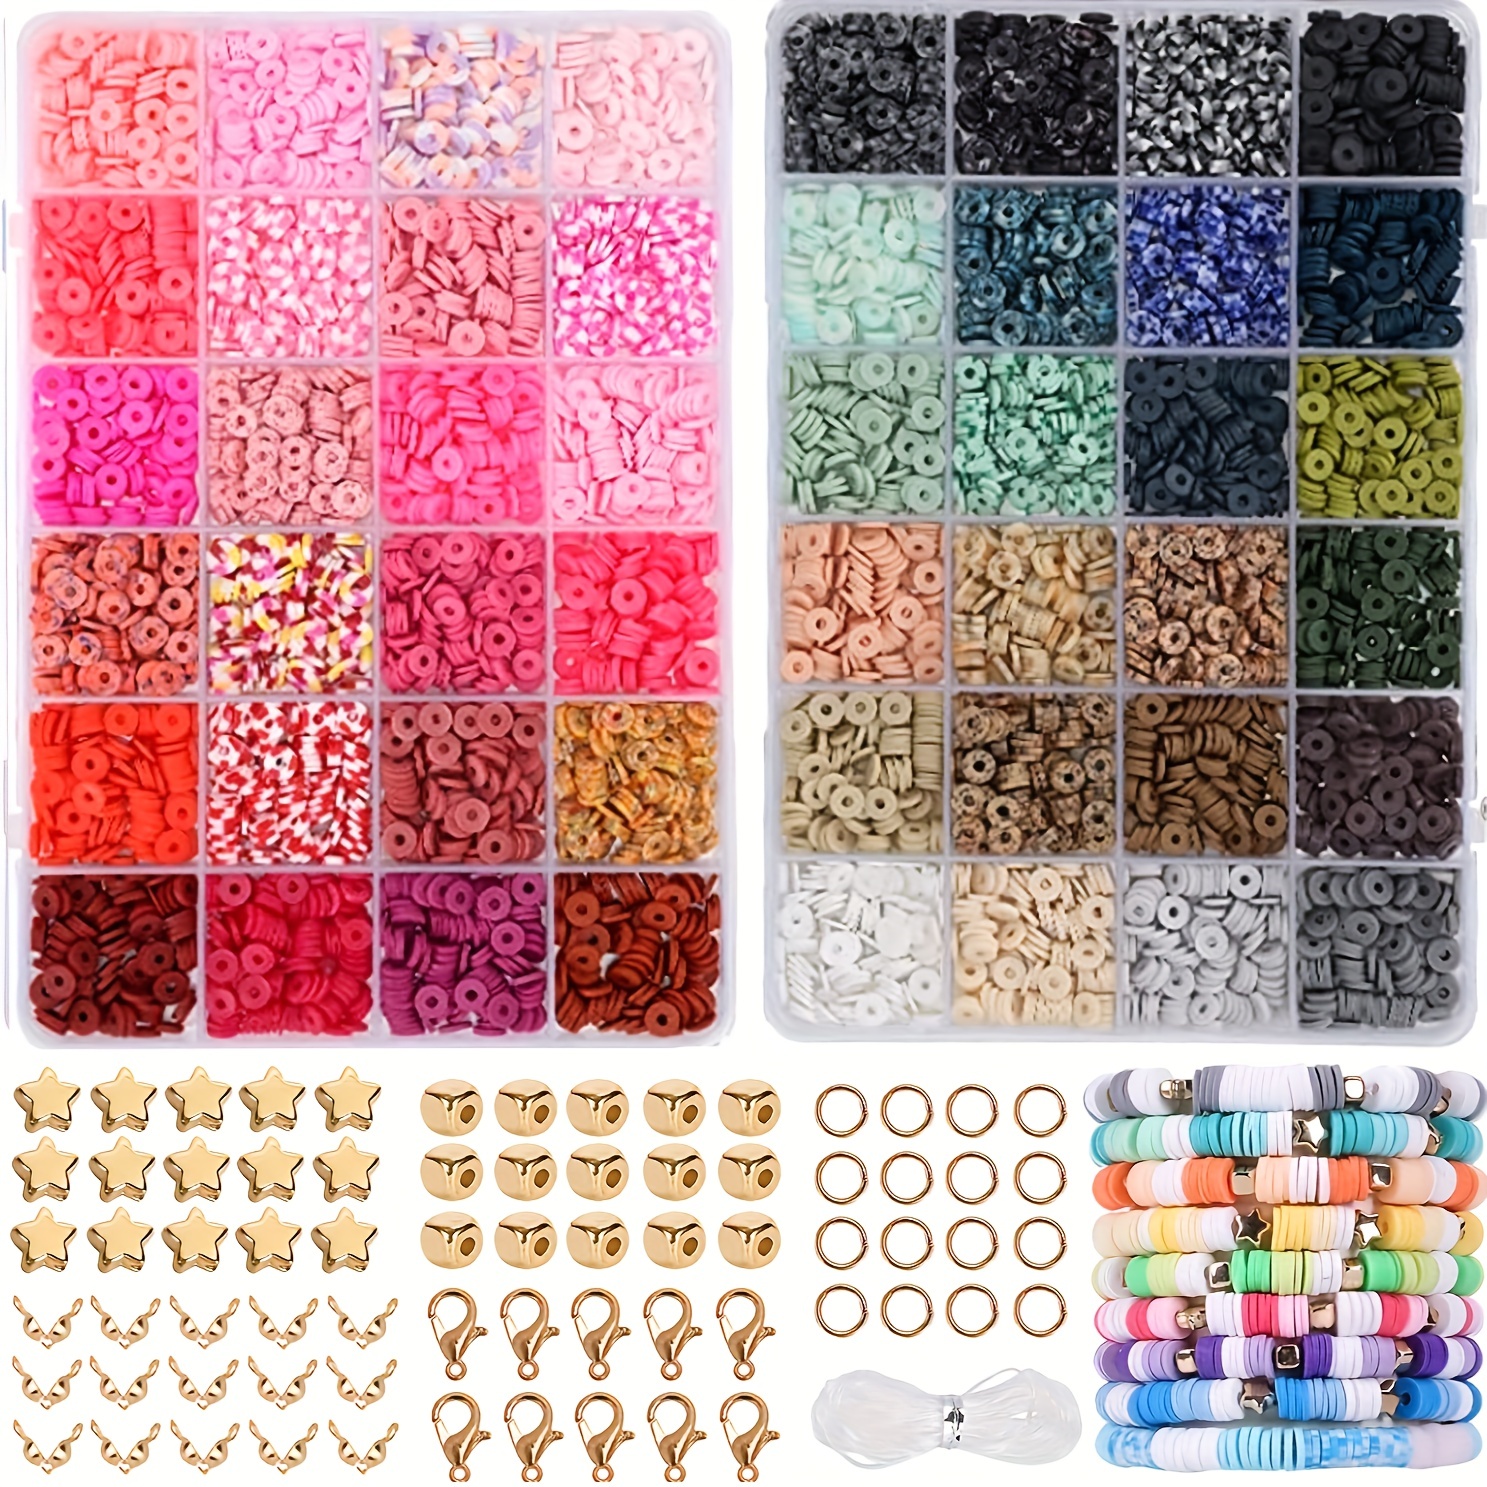 Luyi 18500 Pcs 48 Strands Clay Beads Polymer Clay Heishi Beads Flat Round Disc Beads and Alphabet Letter Beads for Bracelet Jewelr